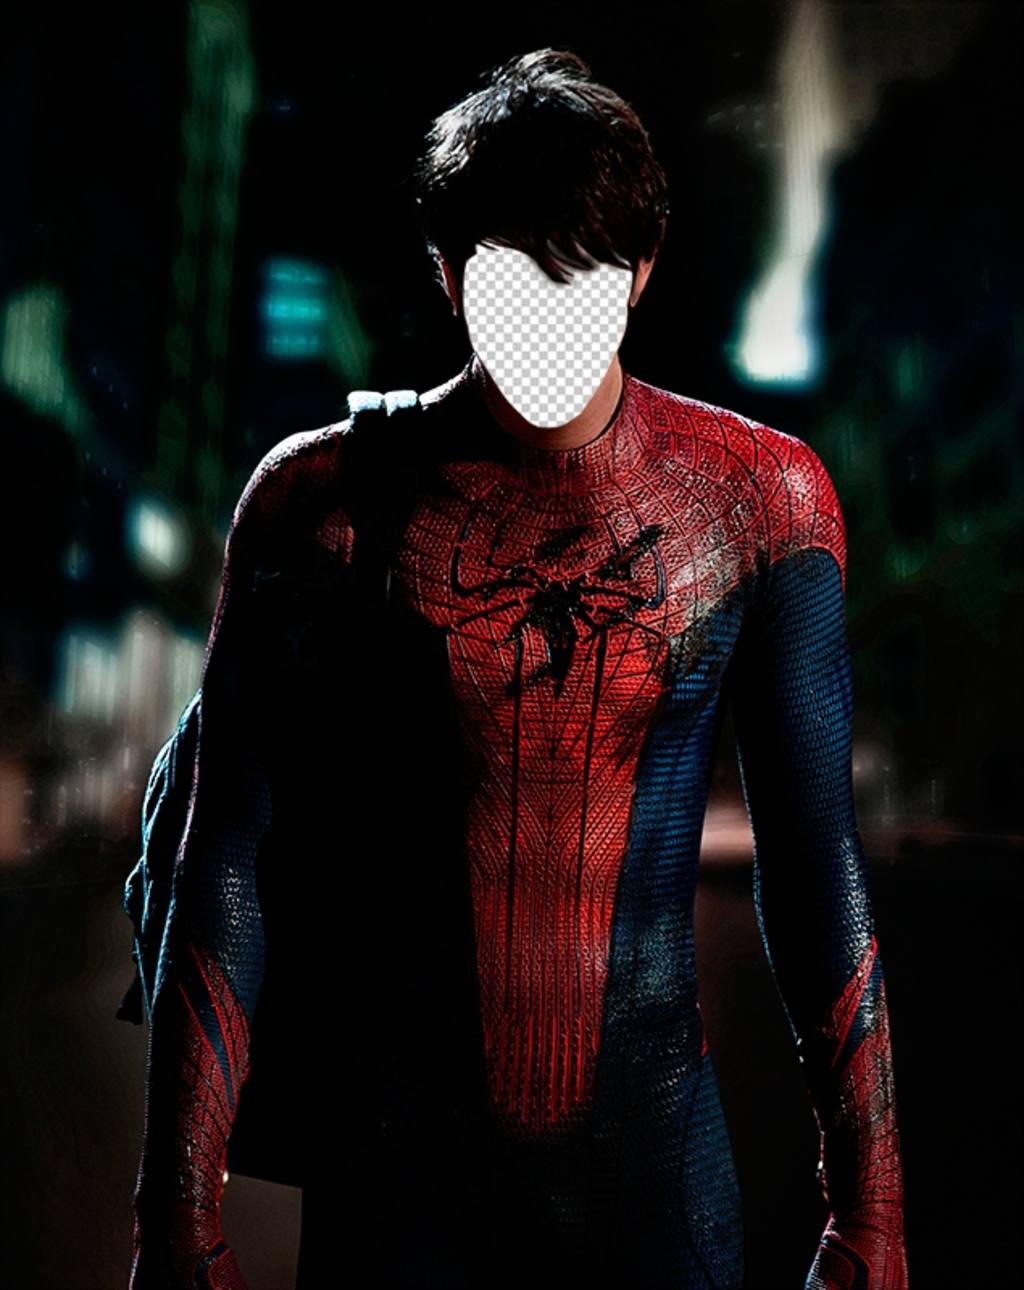 With this photomontage put your face on the body of Spiderman ..